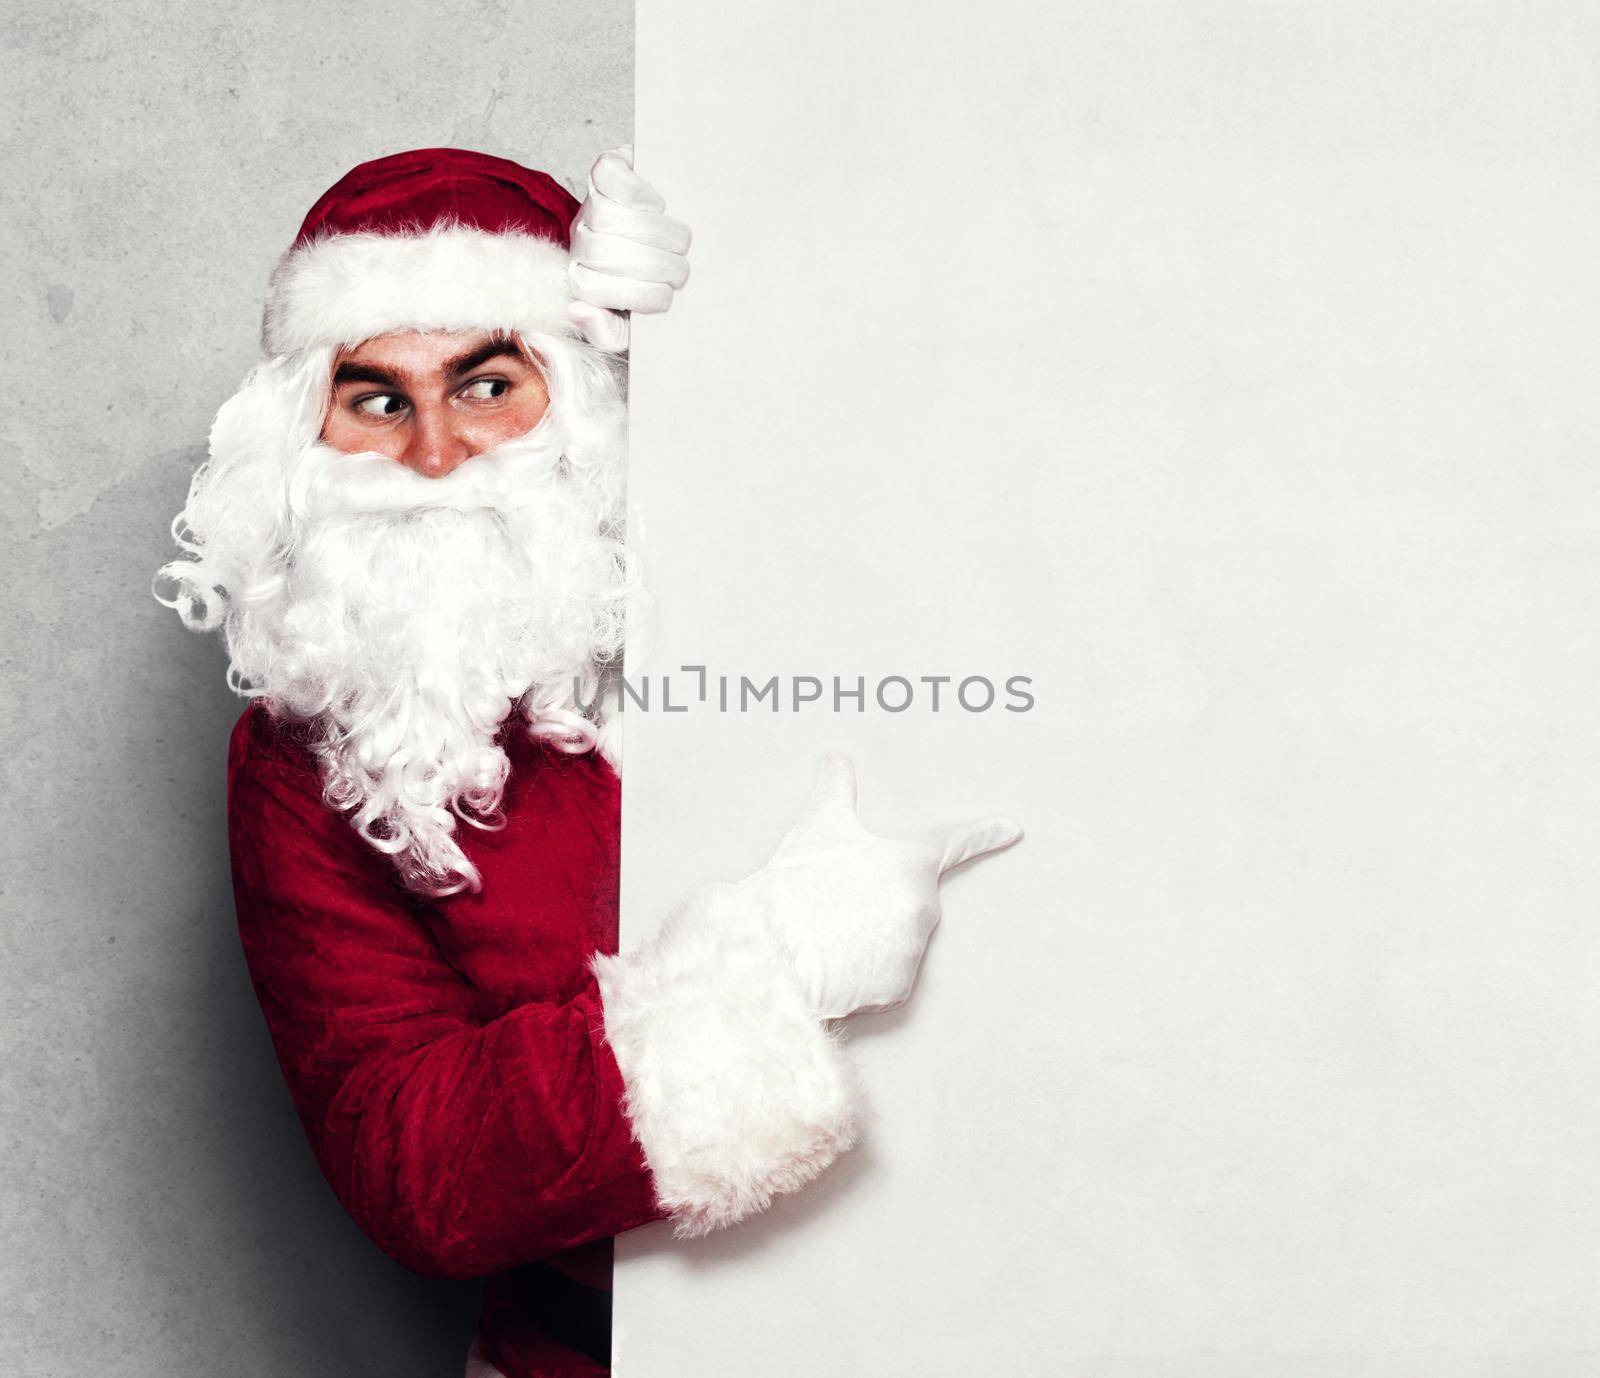 Happy Santa Claus pointing in blank wall with copy space by Taut